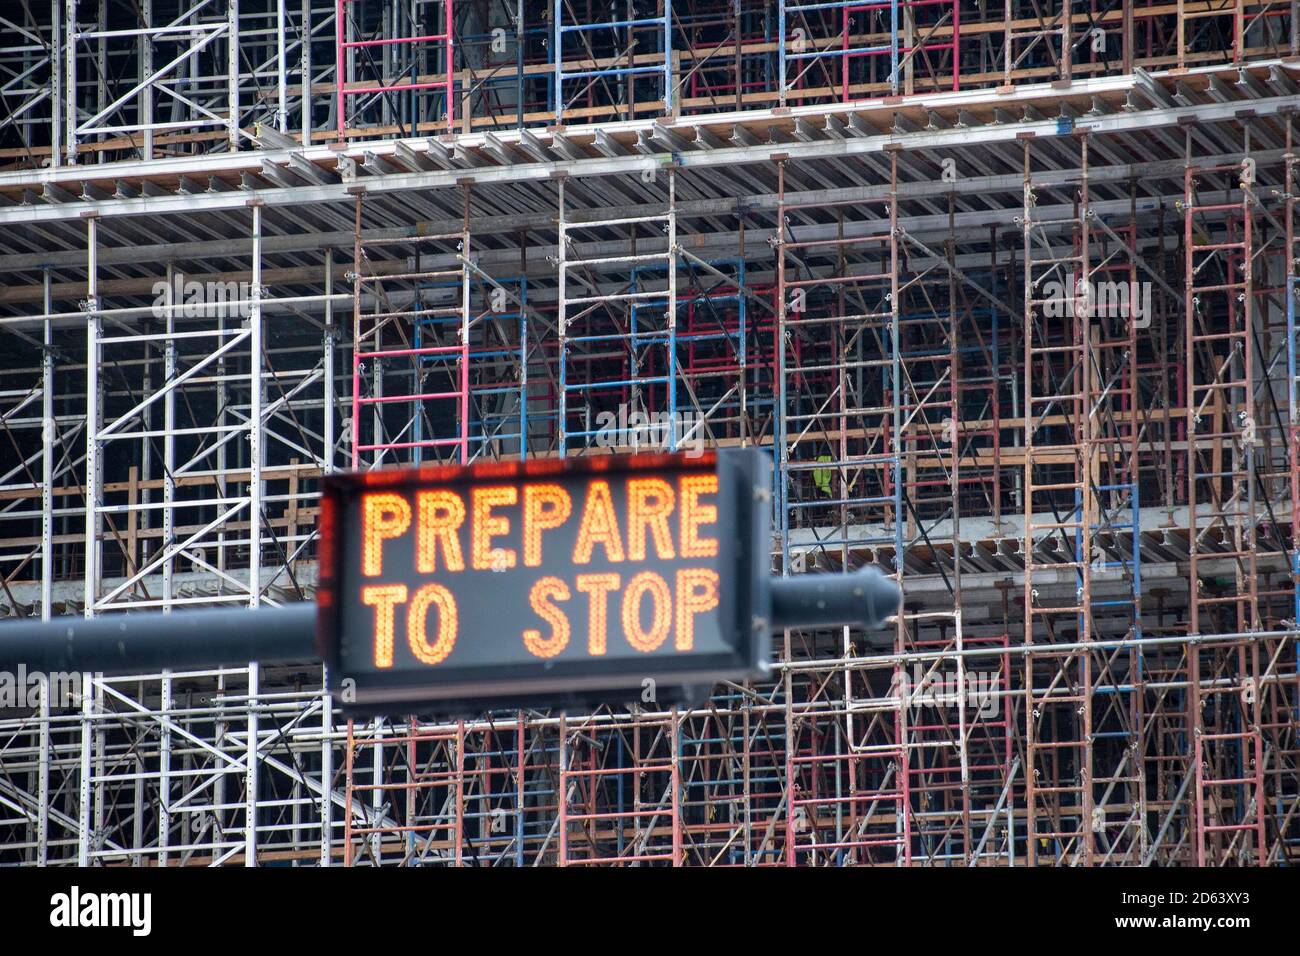 Scaffolding covering a building under renovation Stock Photo